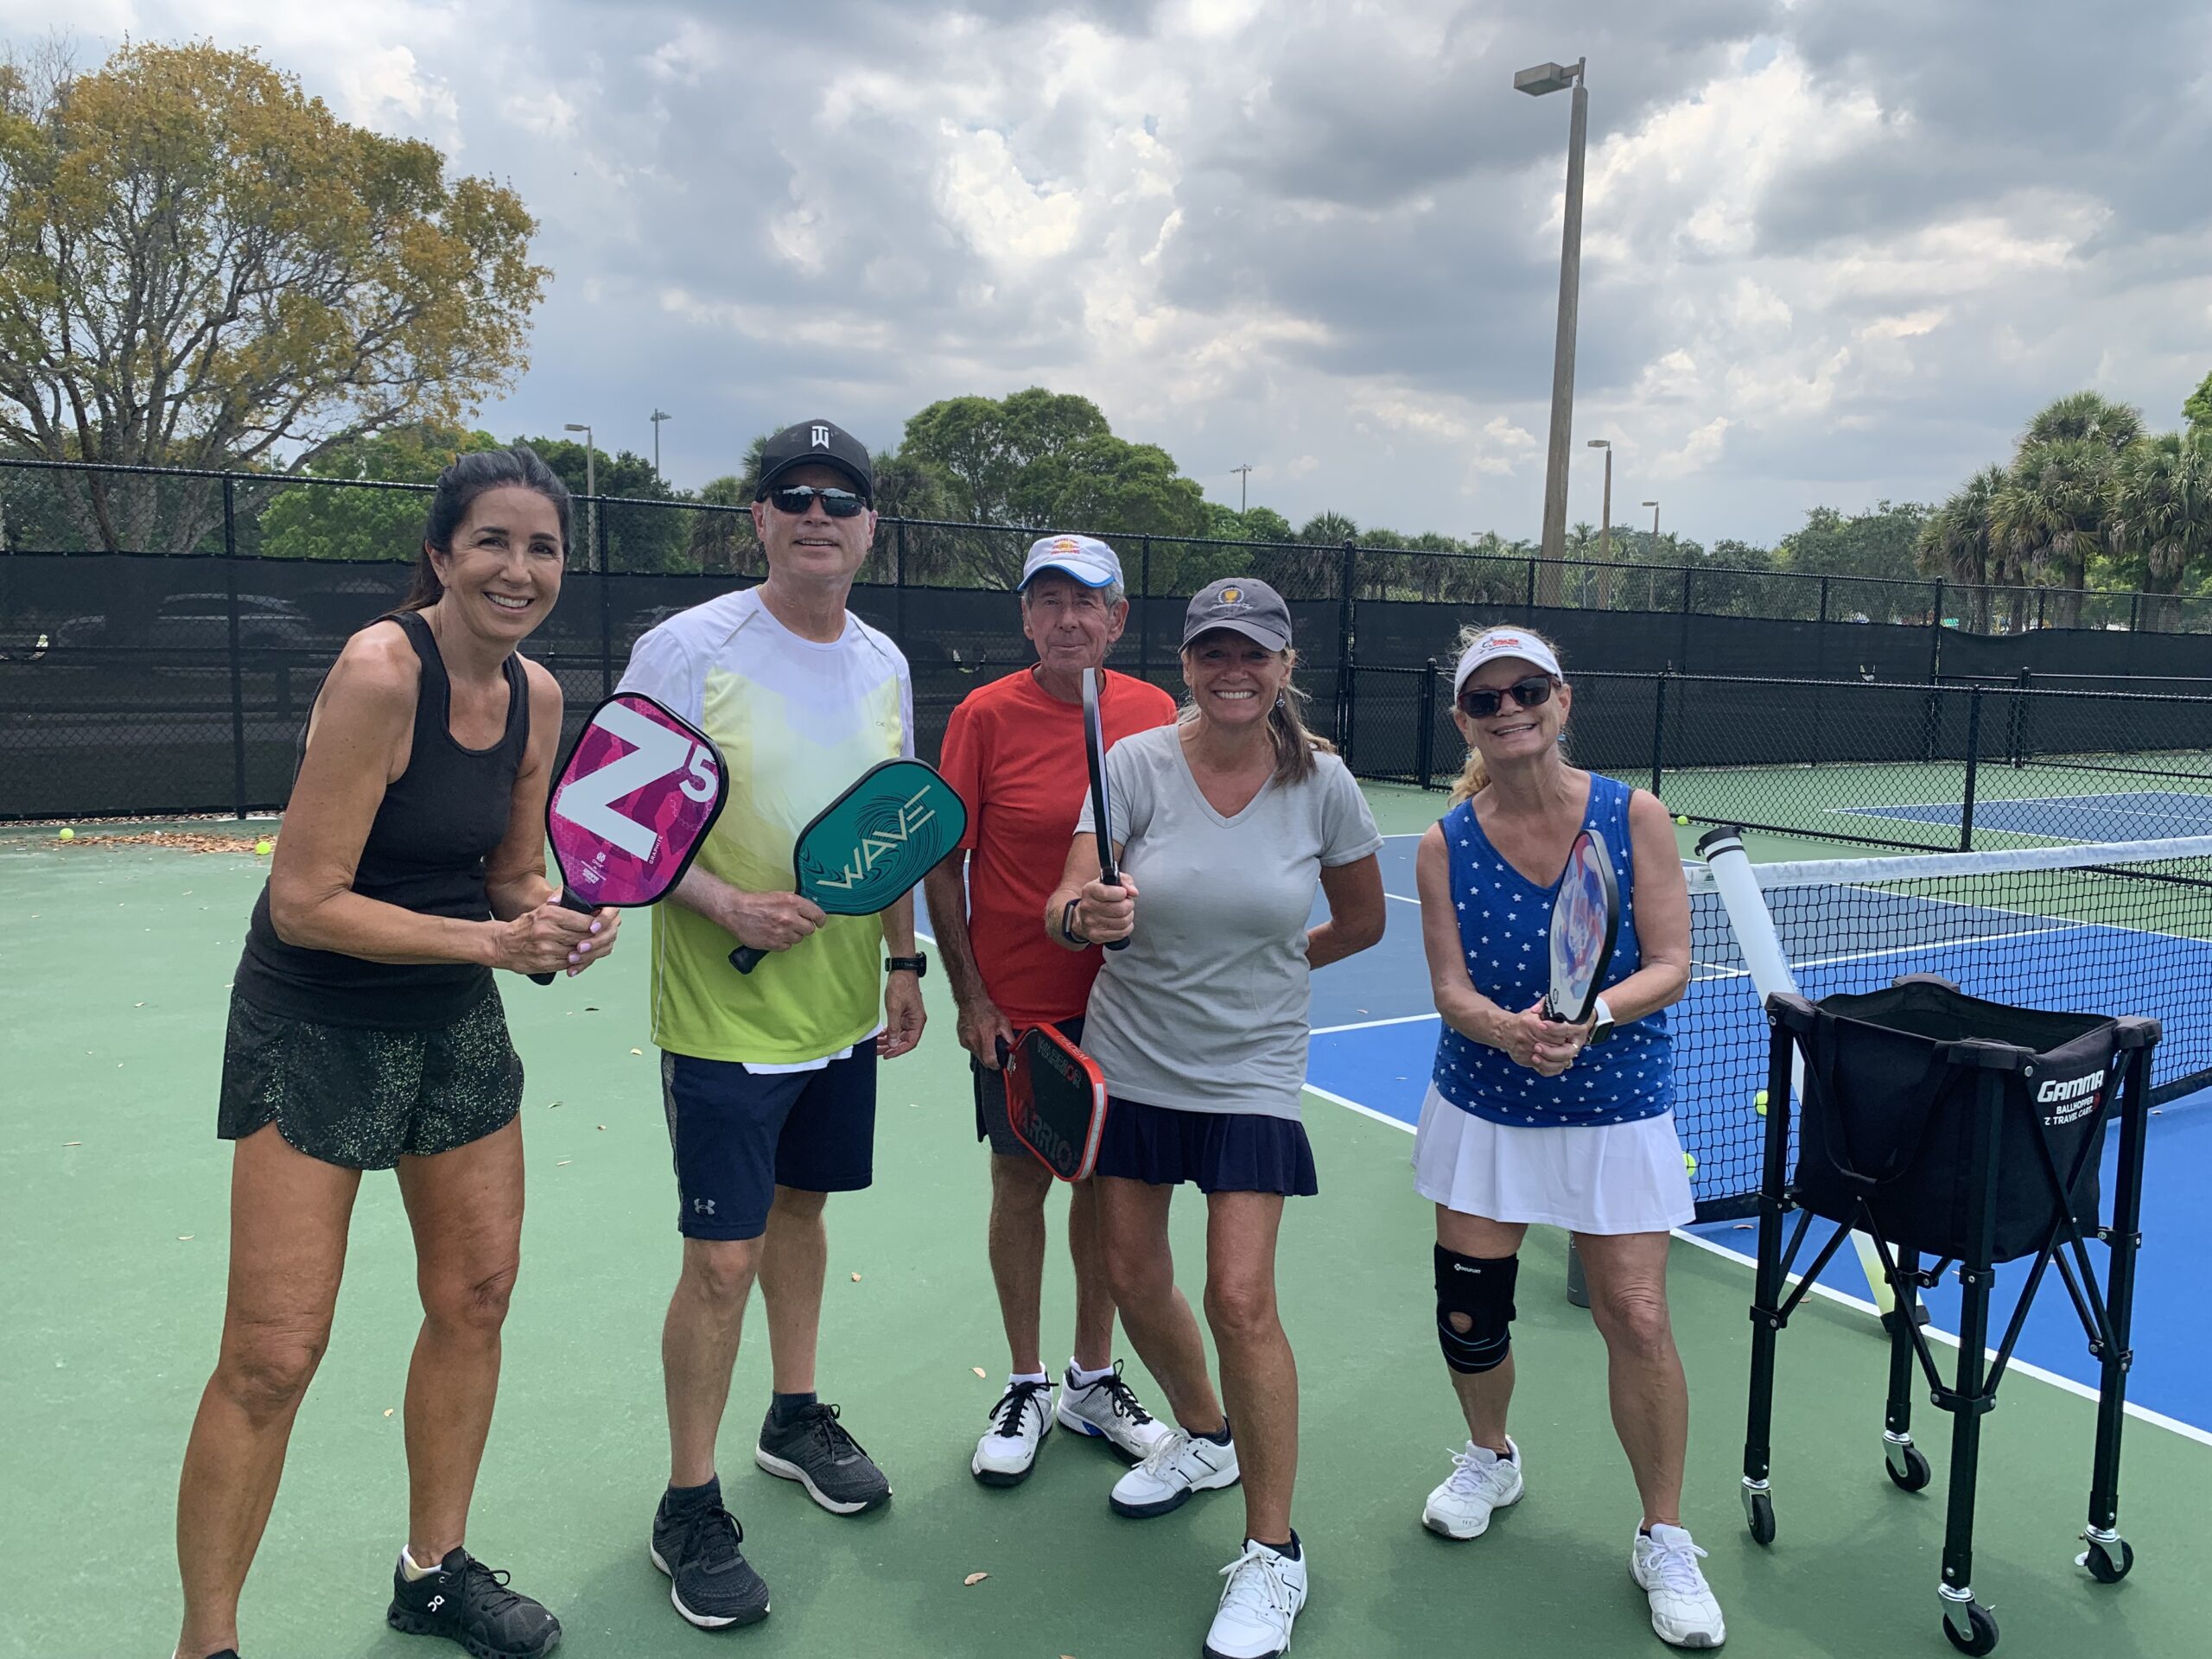 bob-with-lisa-marsy-angie-and-joe-after-a-beginners-pickleball-clinic-in-boca-raton-florida